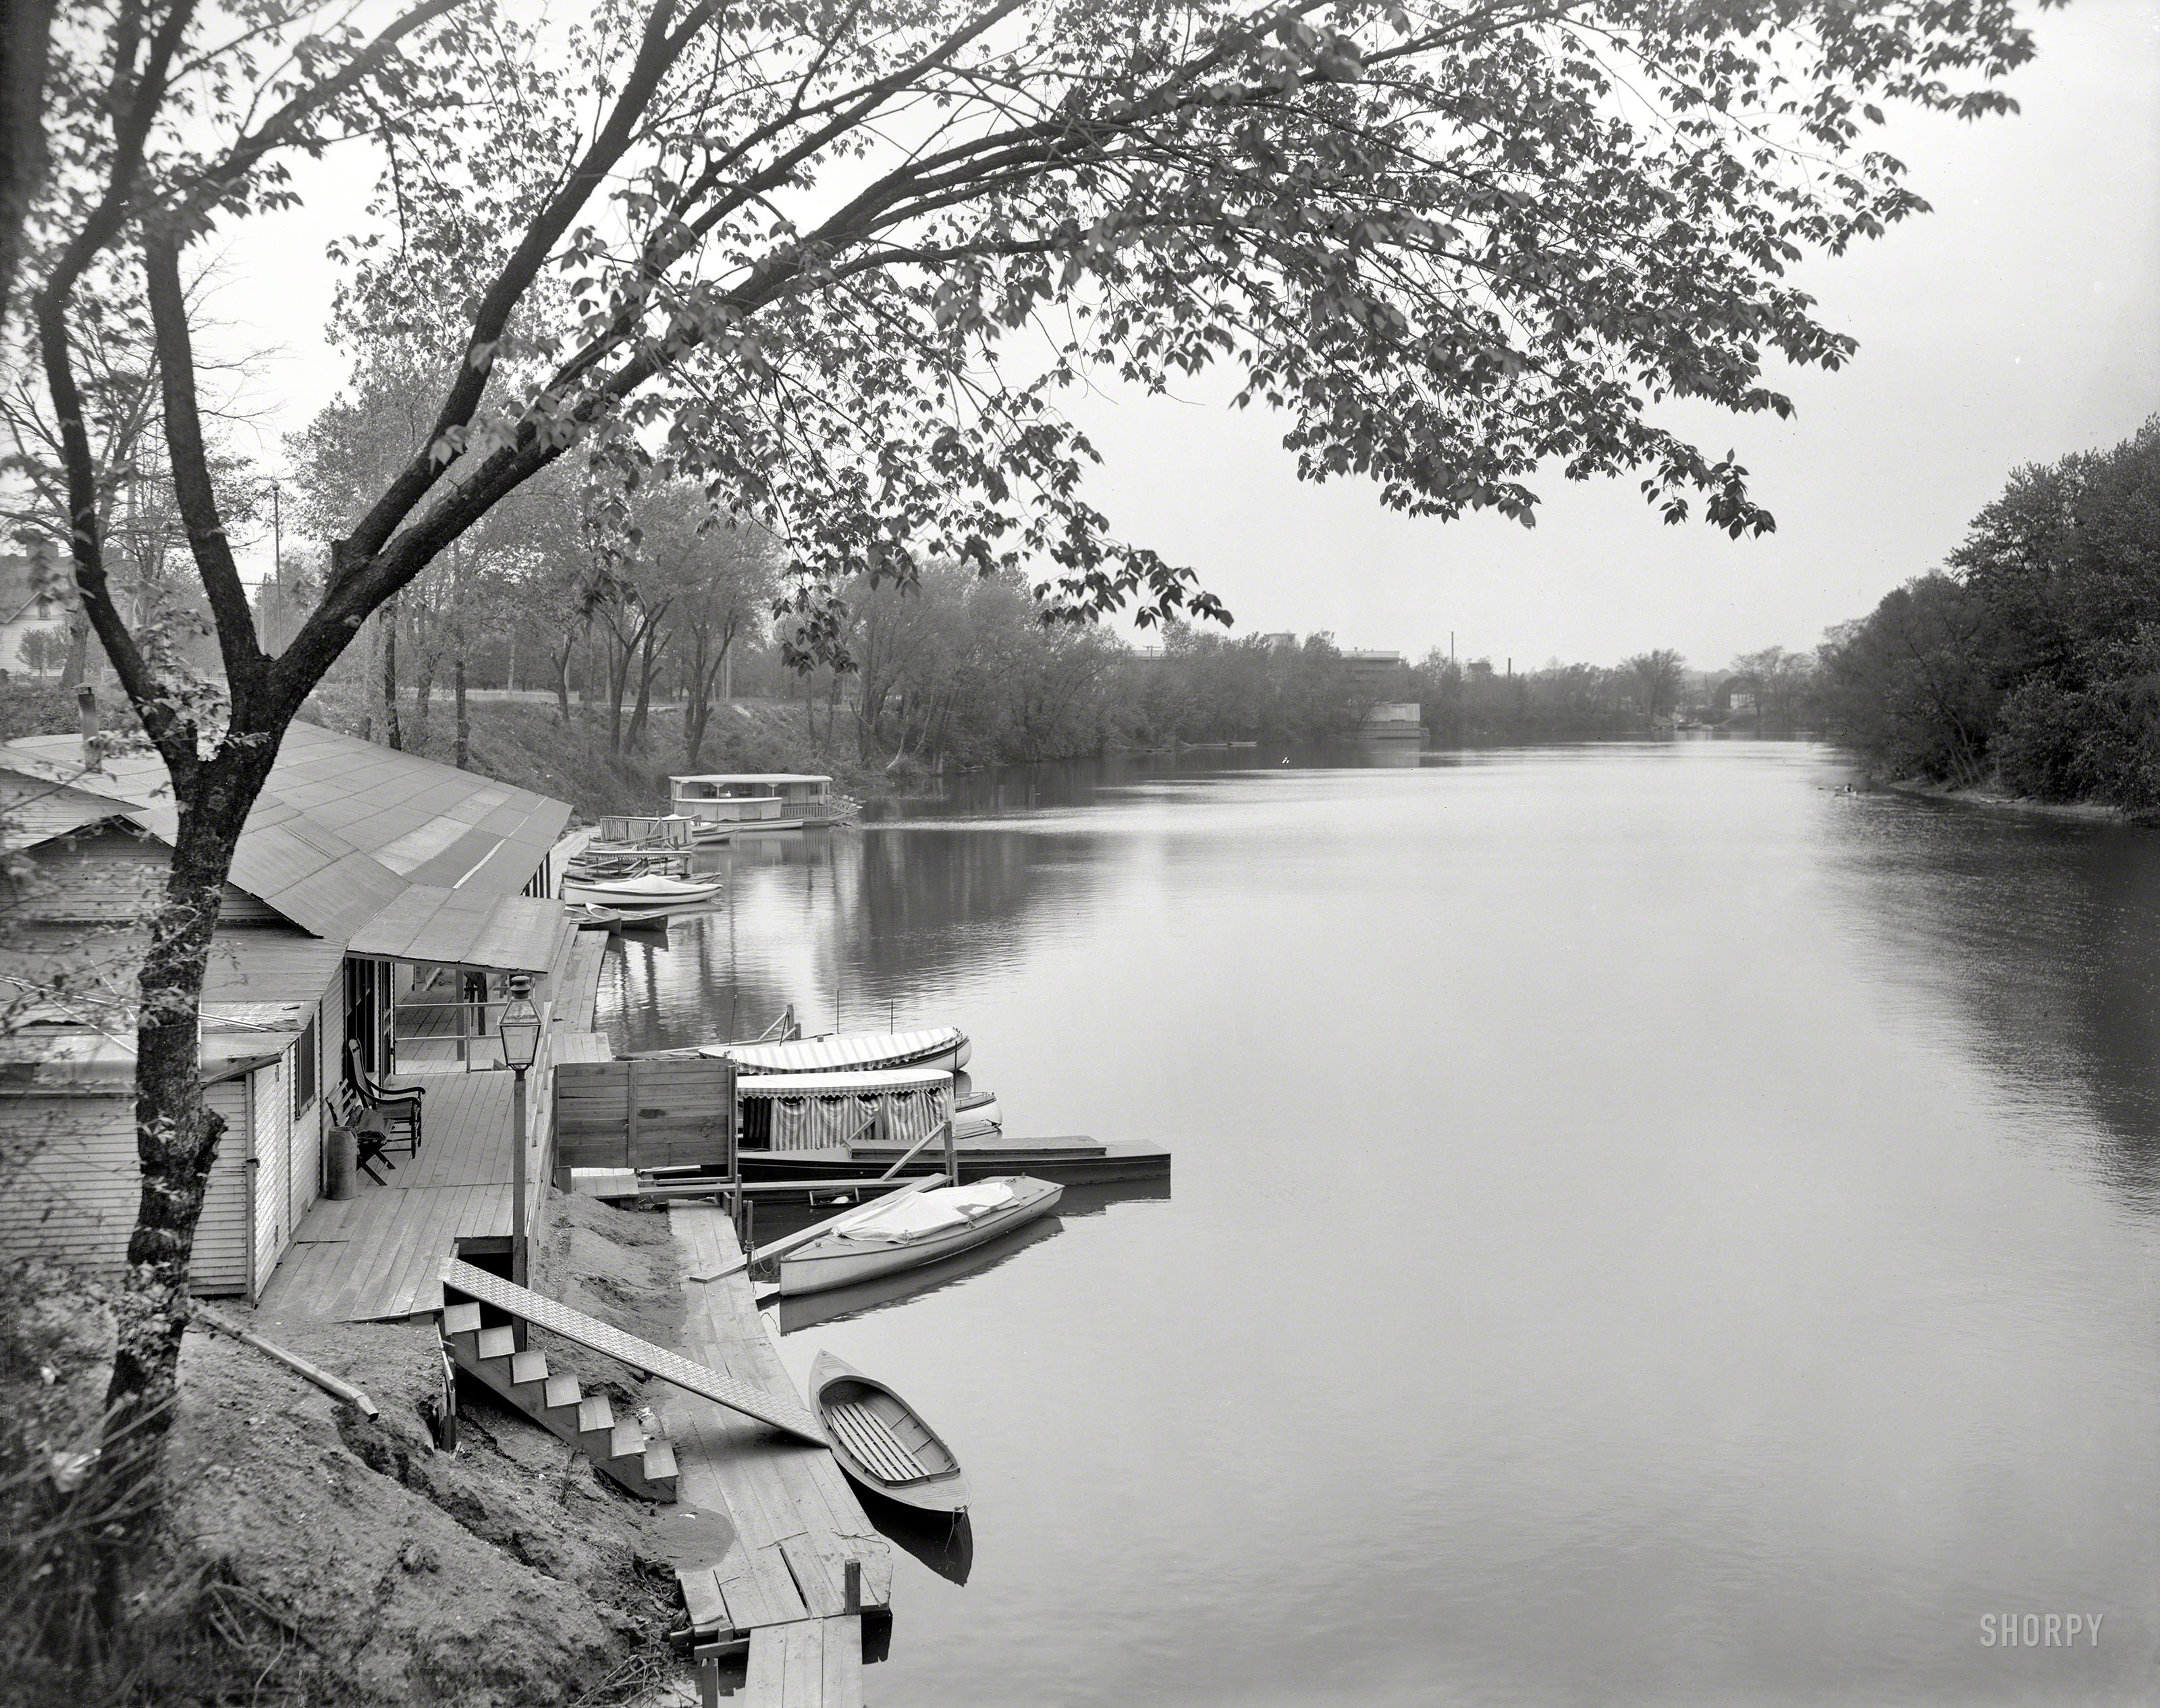 1907. "White River at Broad Ripple Park, Indianapolis." Where's our picnic basket? 8x10 inch glass negative, Detroit Publishing Company. View full size.